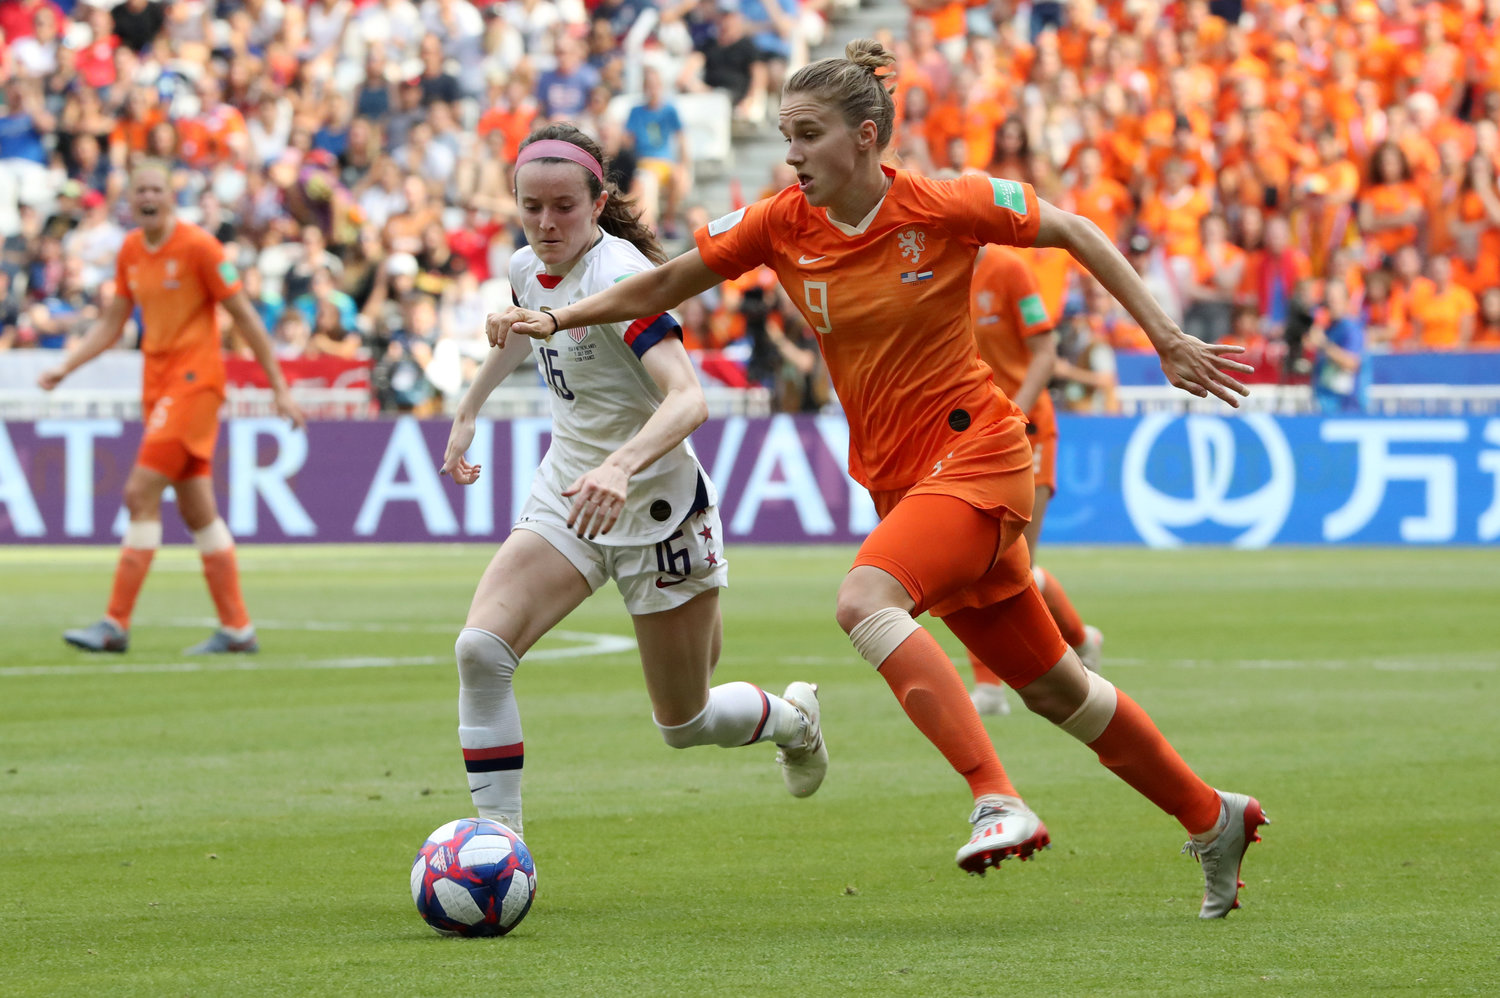 Rose Lavelle (left) of the United States, a graduate of Mount Notre Dame High School in Reading, Ohio, and Vivianne Miedema of the Netherlands battle for the ball during the FIFA Women’s World Cup in Lyon, France, July 7, 2019. The U.S. won its record fourth Women’s World Cup title and second in a row, beating the Netherlands 2-0.